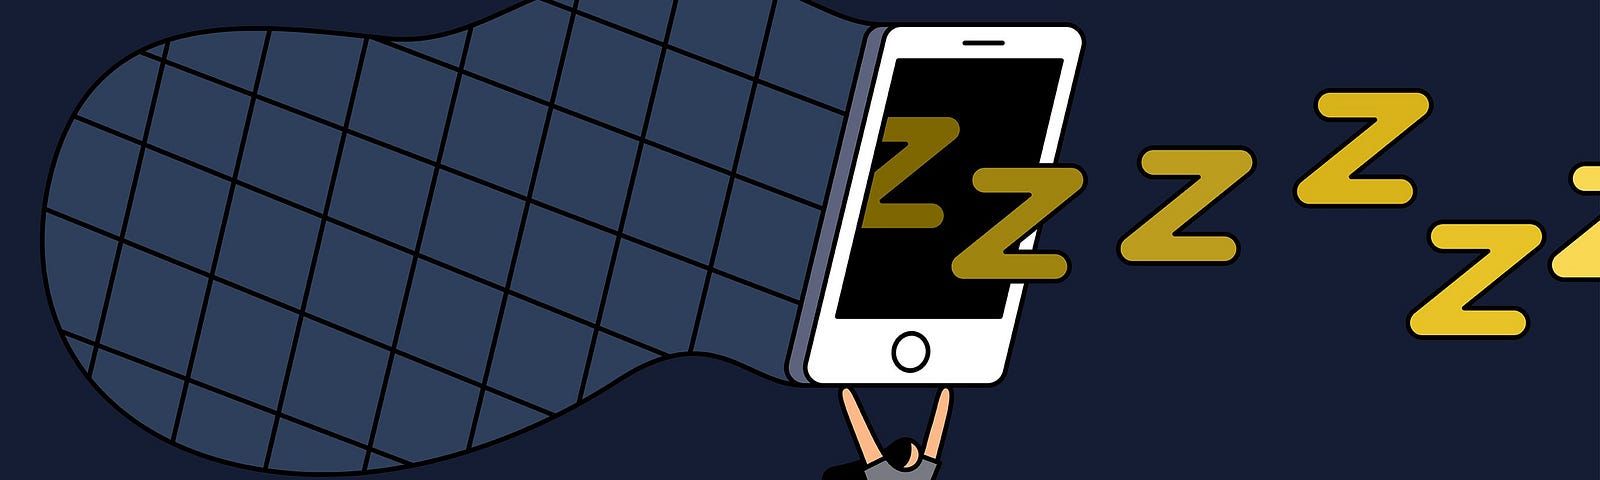 Illustration of a person wearing pajamas, holding a huge phone attached to a net, trying to capture floating yellow Z’s.